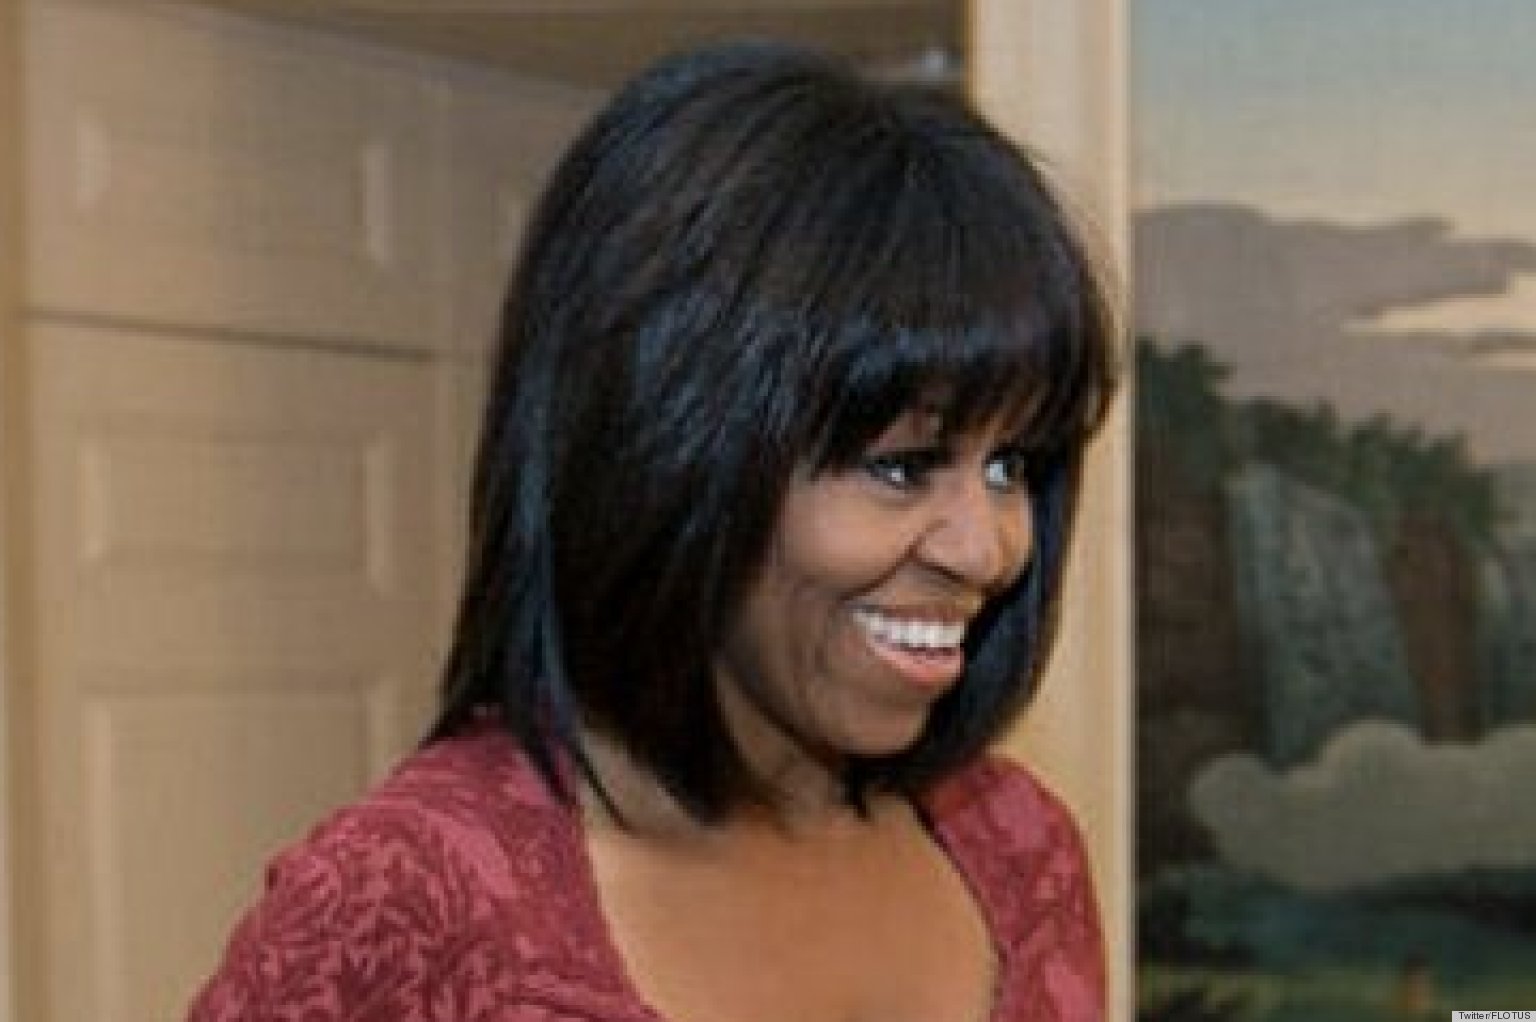 Michelle Obama's Bangs Are A Total Shock To The System (PHOTO) | HuffPost1536 x 1022